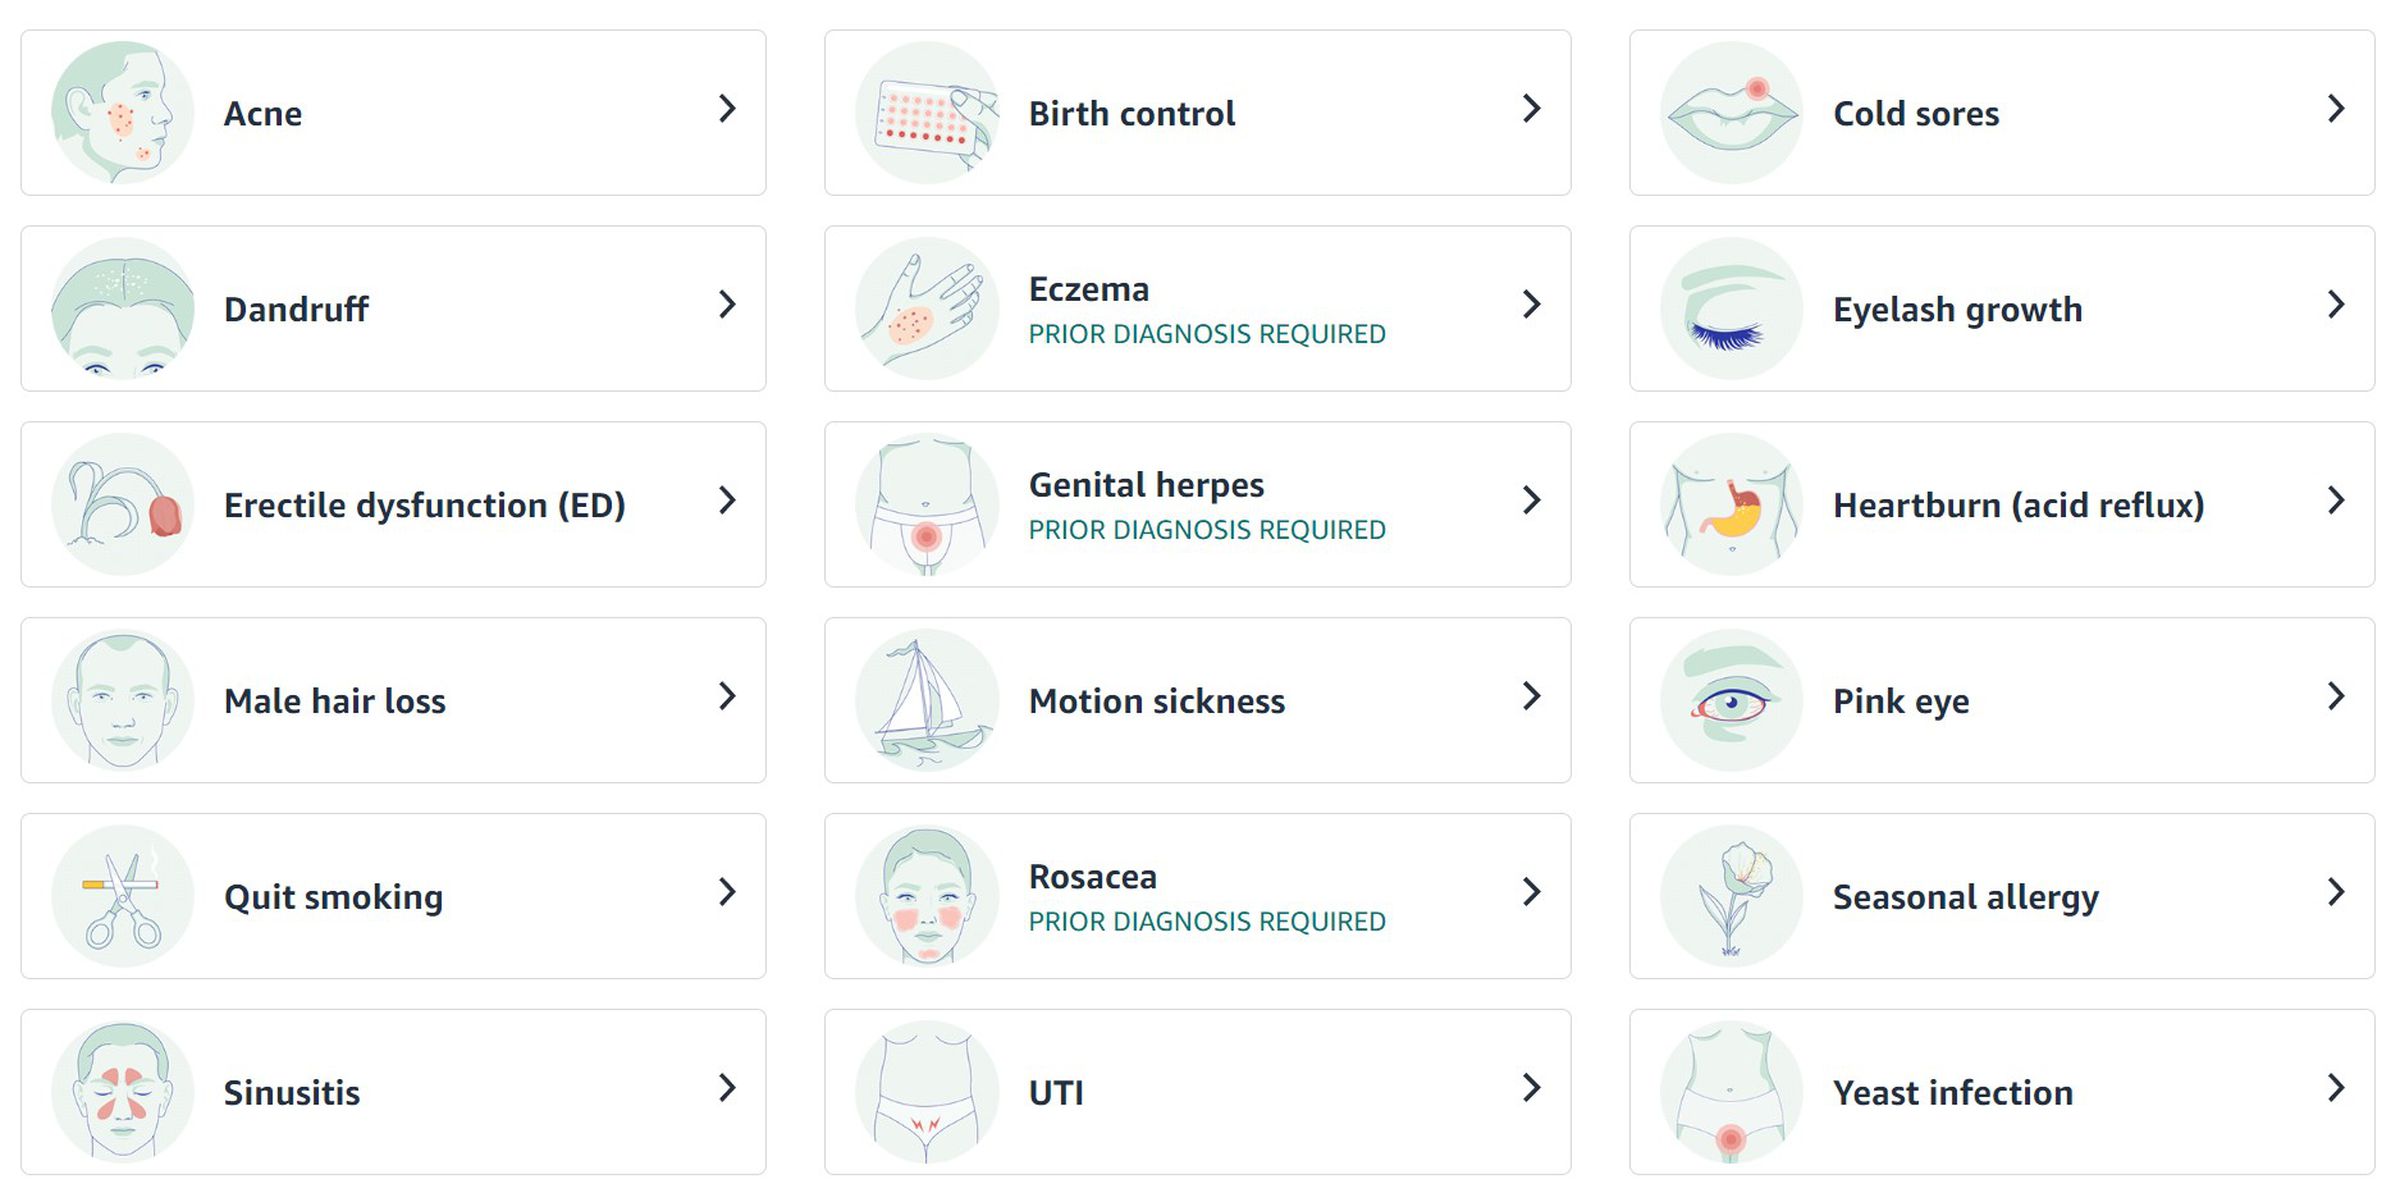 A screengrab of common conditions that can be treated through the Amazon Clinic healthcare service, including allergies, dandruff, hair loss, birth control, erectile dysfunction, and acne.